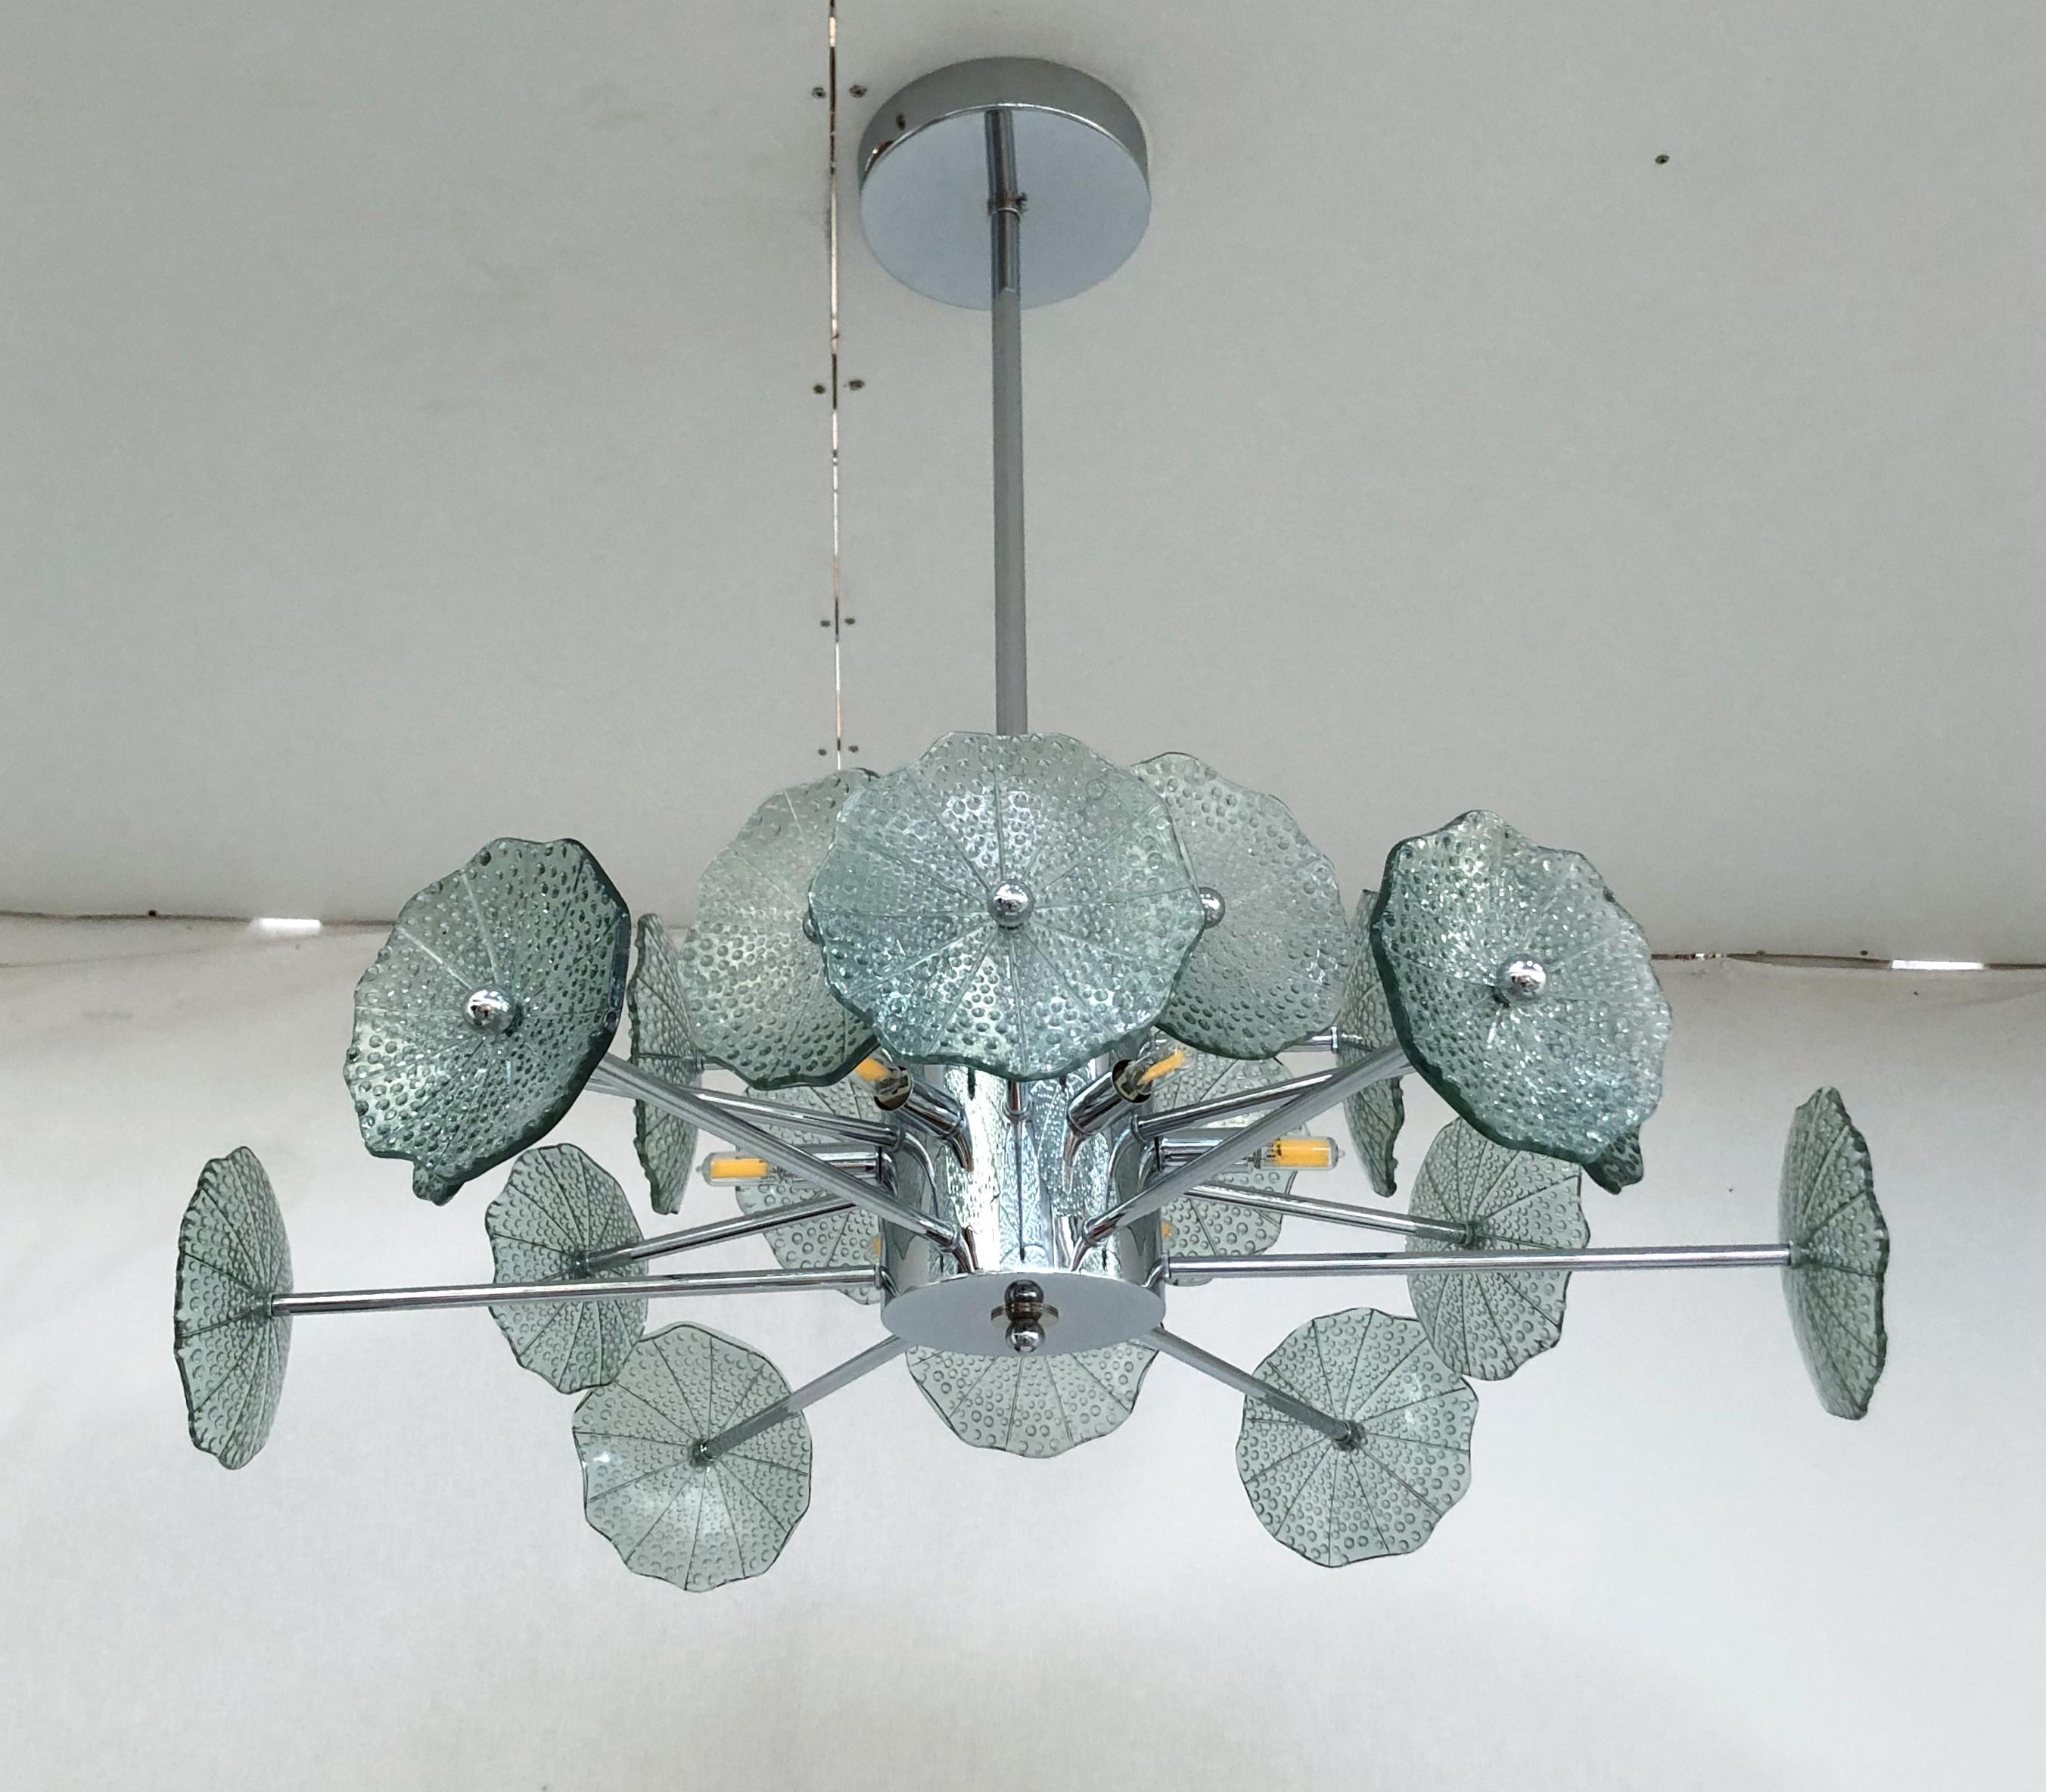 Italian chandelier with smoky green Murano glasses with bubbles mounted on polished chrome finish frame by Fabio Ltd / Made in Italy
6 lights / G9 type / max 40W each
Diameter: 29.5 inches / Height: 27.5 inches including rod and canopy.
 